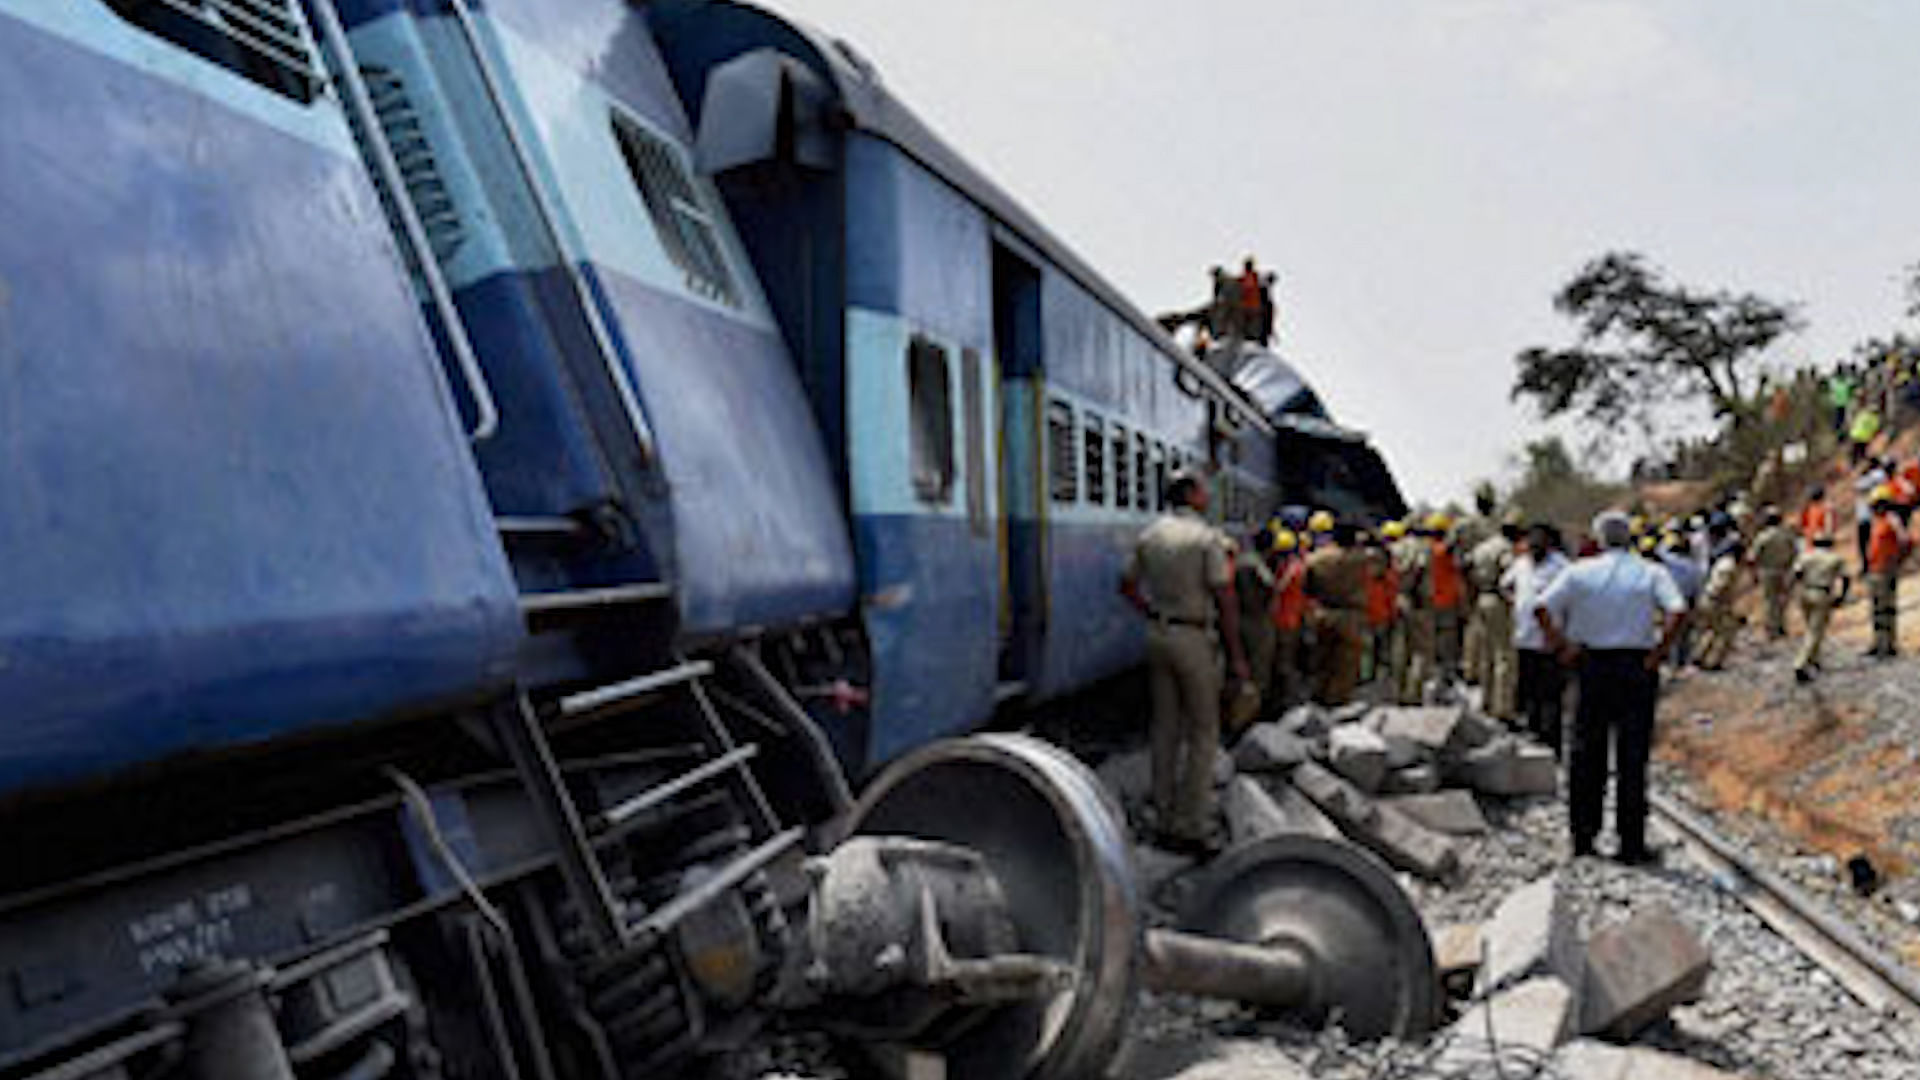 In Graphics: WATCH how Patna-Indore express train derailed - YouTube